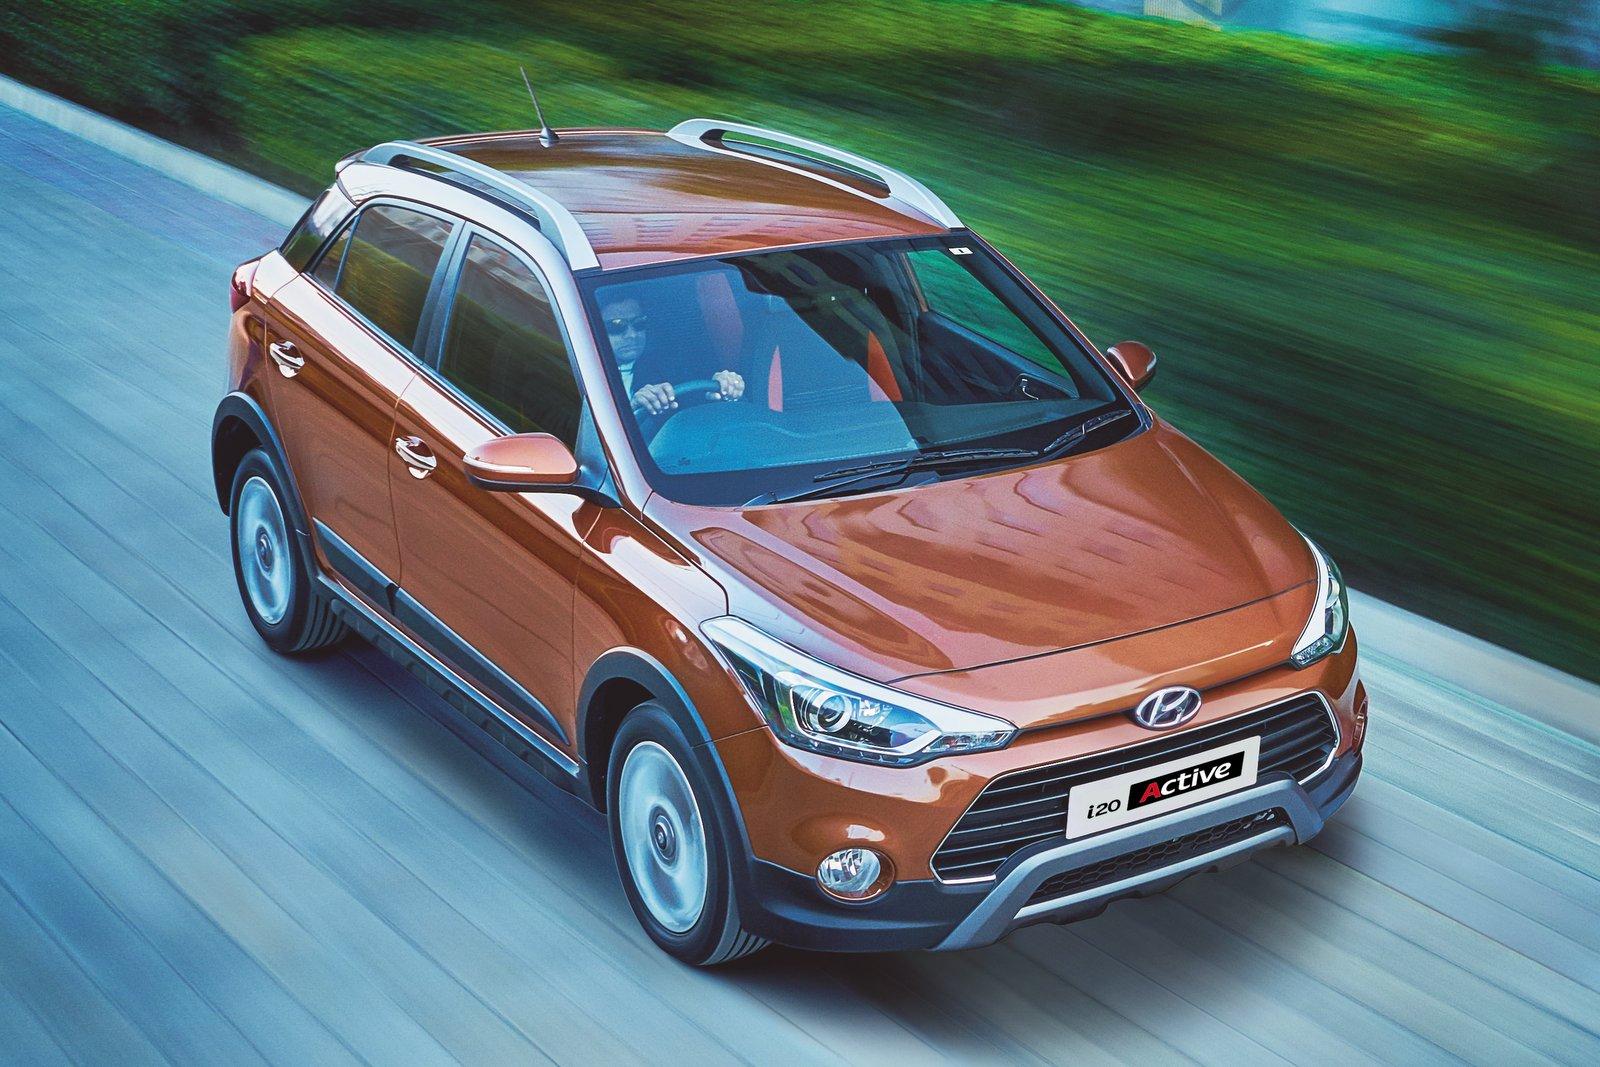 The Hyundai i20 Active Is India's Answer to the Sandero